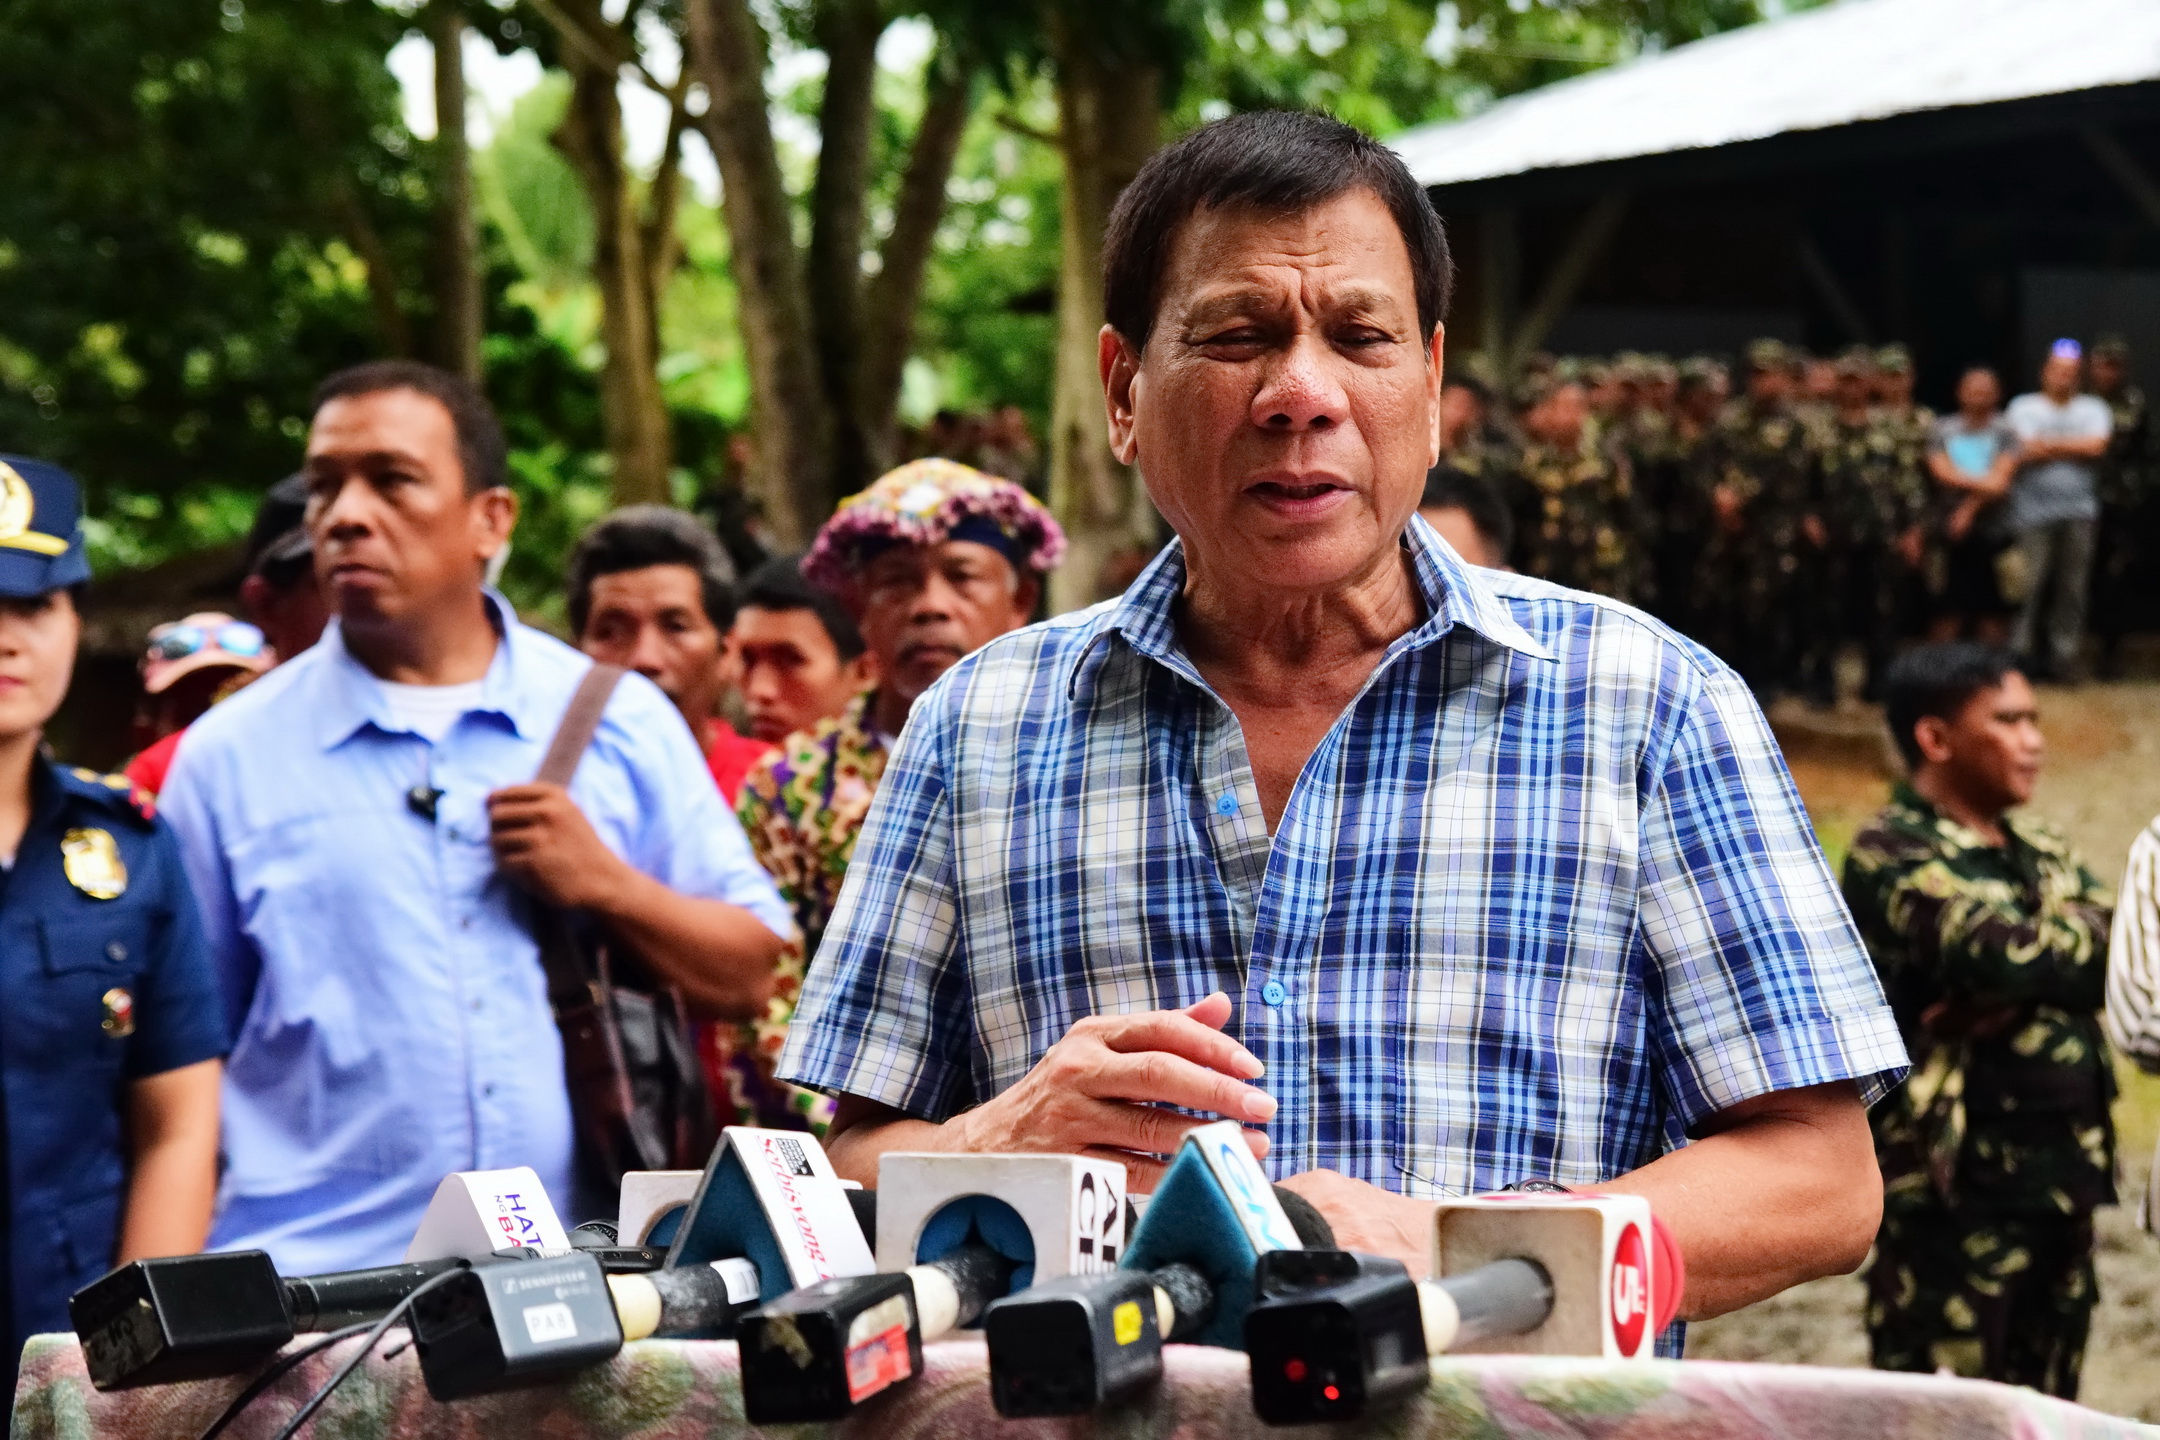 DEADLINE. President Rodrigo R. Duterte announces during his visit at Camp Morgia in Doña Andrea, Asuncion, Davao del Norte on Friday, July 29, 2016 that the New People’s Army only has until 5:00 p.m. of July 30, Saturday to declare a ceasefire from their side. Otherwise, Duterte will lift the Unilateral Ceasefire he has declared during his first State of the Nation Address. RENE LUMAWAG/PPD